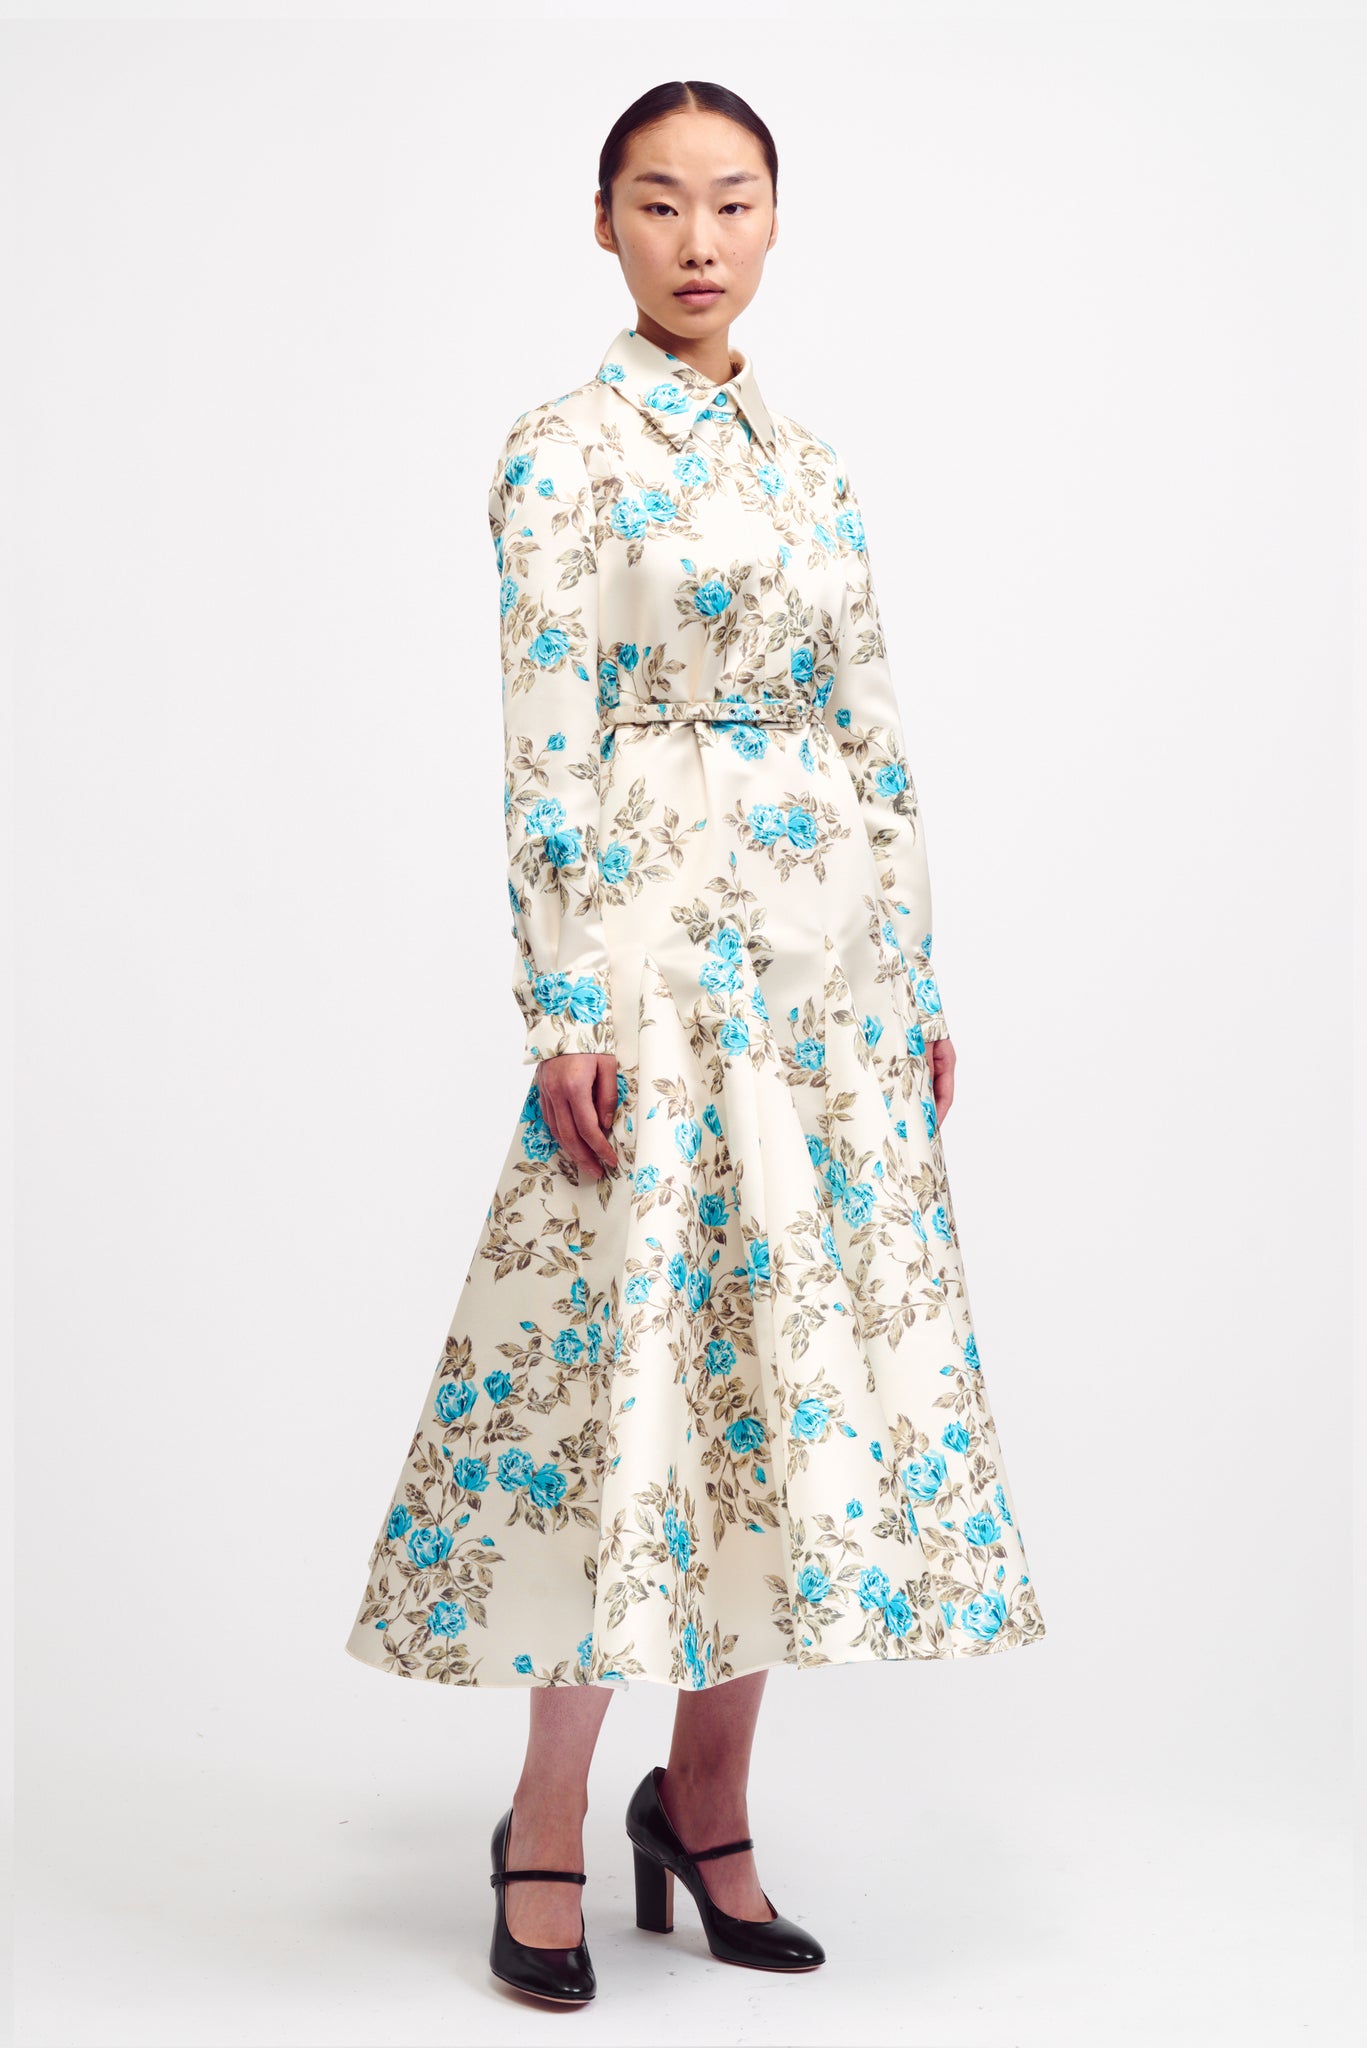 Marion Turquoise Floral Printed Italian Duchess Satin Dress